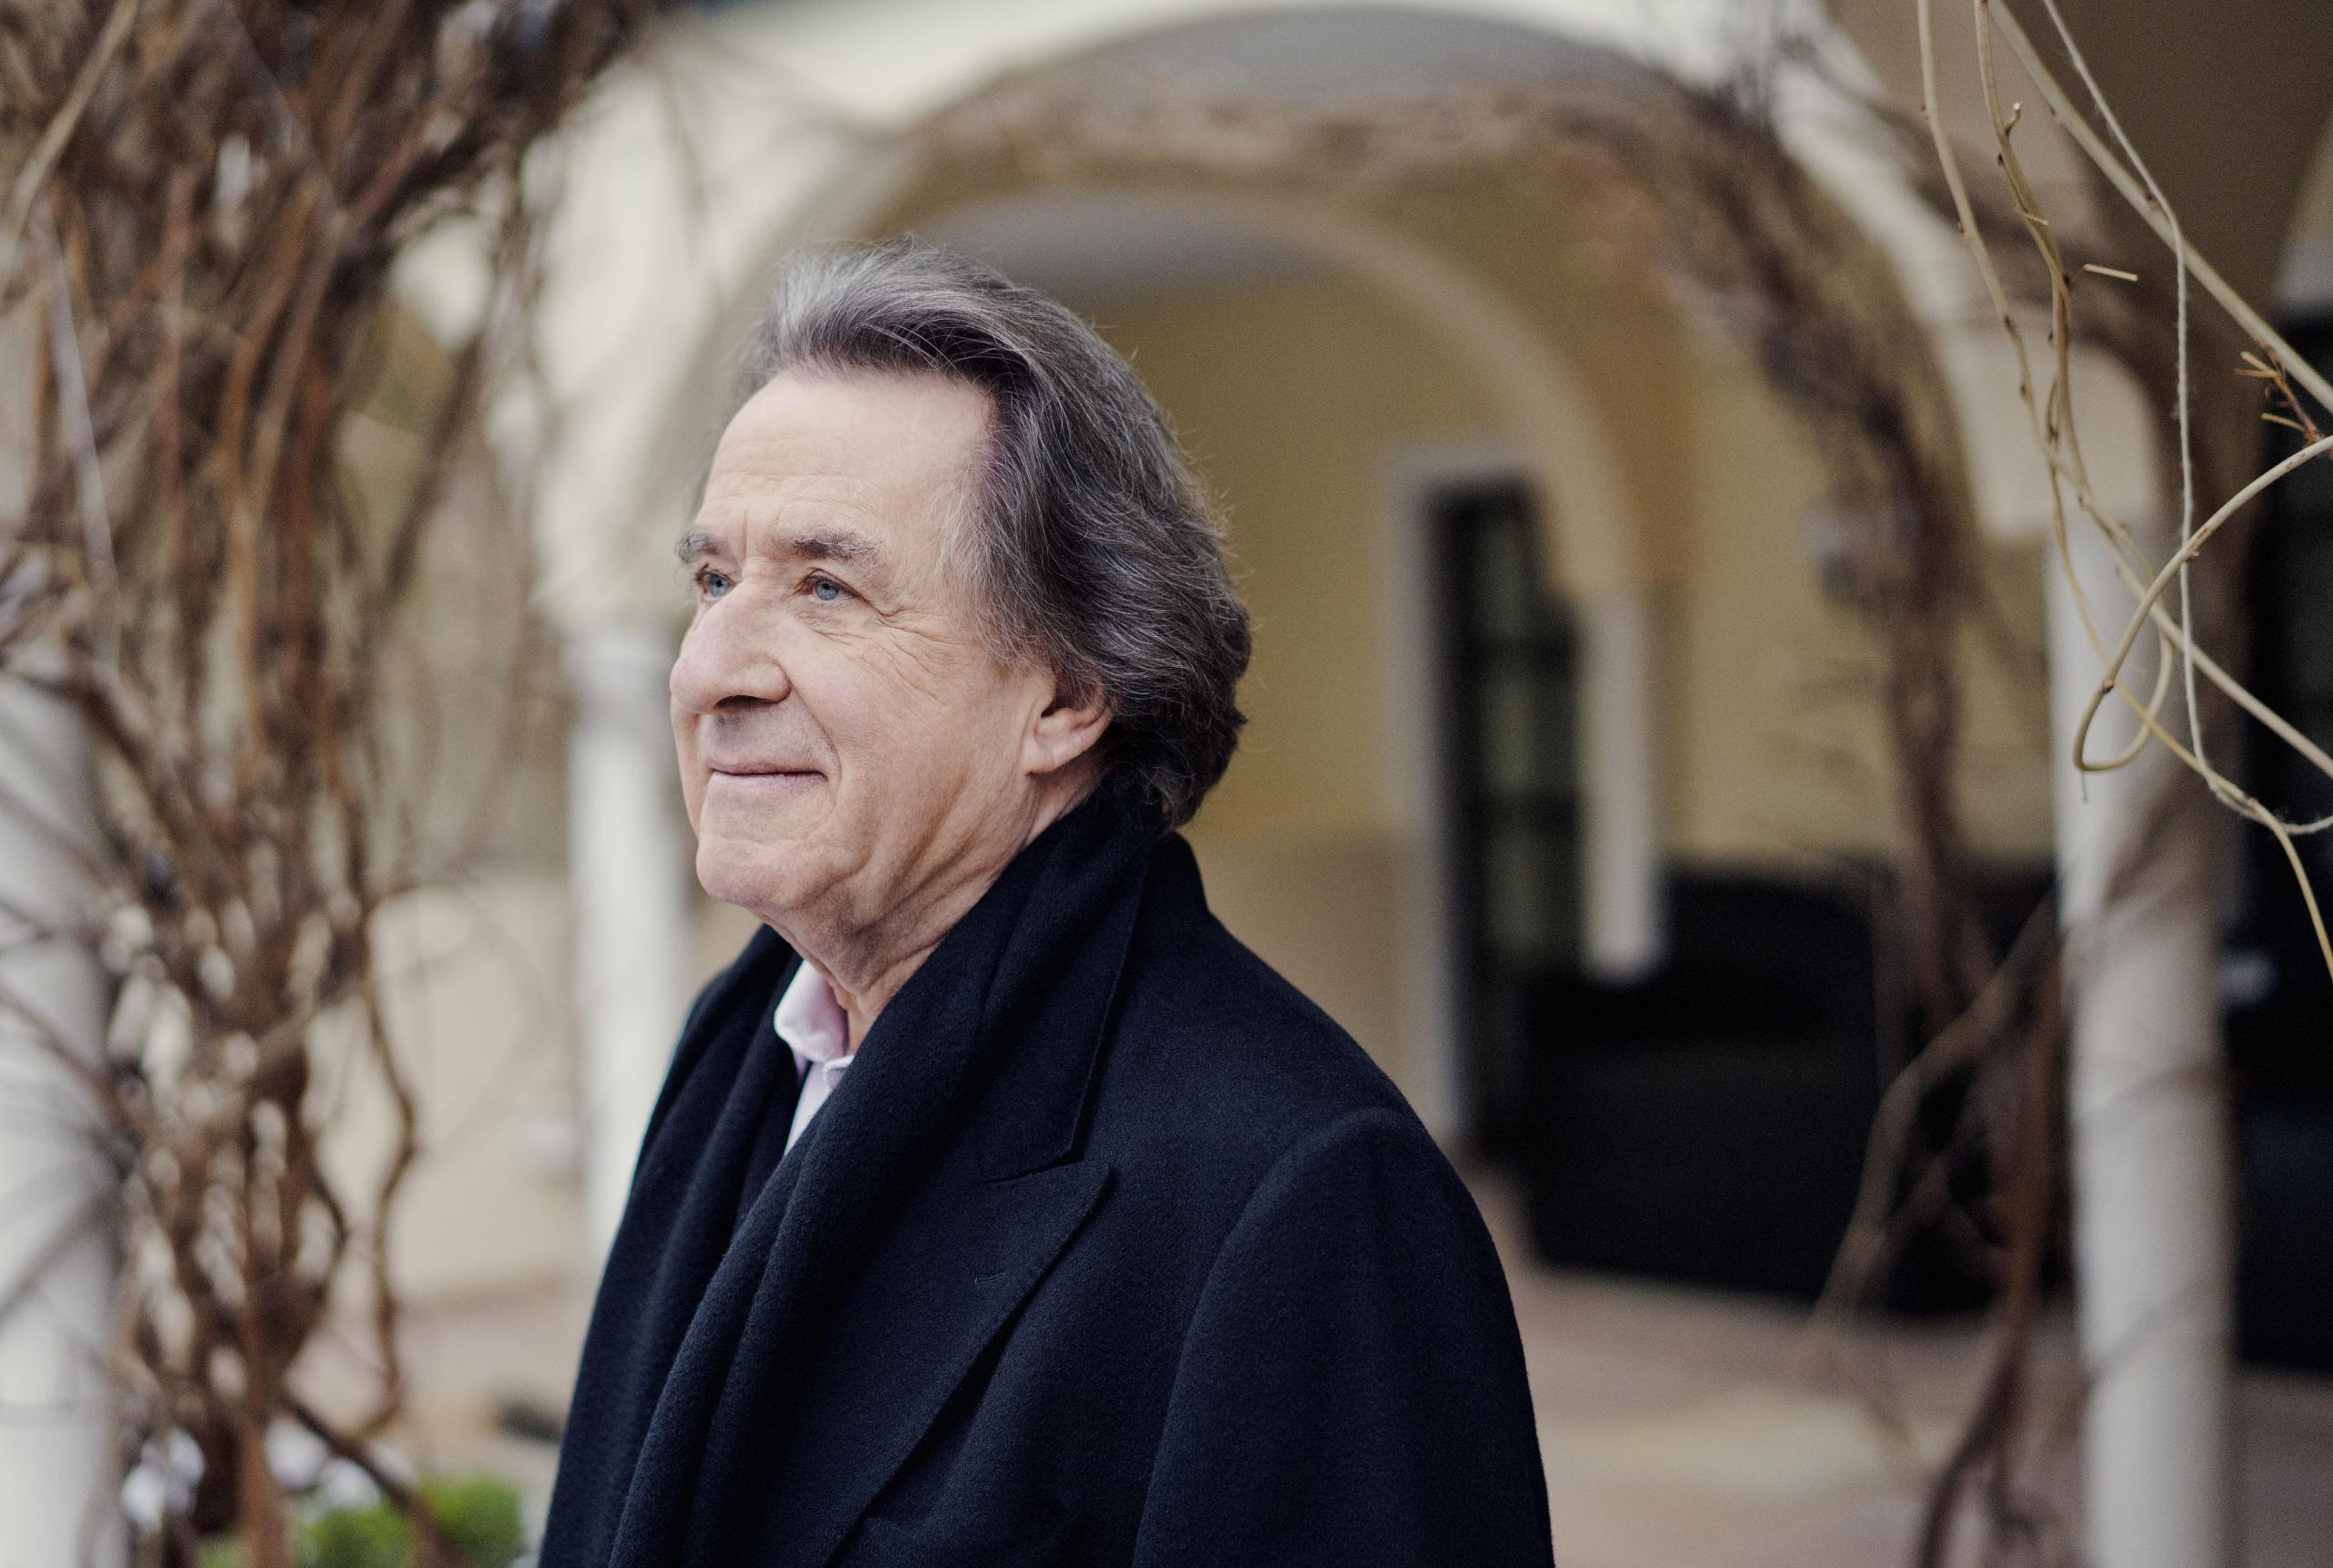 Portrait of the pianist Rudolf Buchbinder. He is standing in a courtyard and can be seen in side profile.